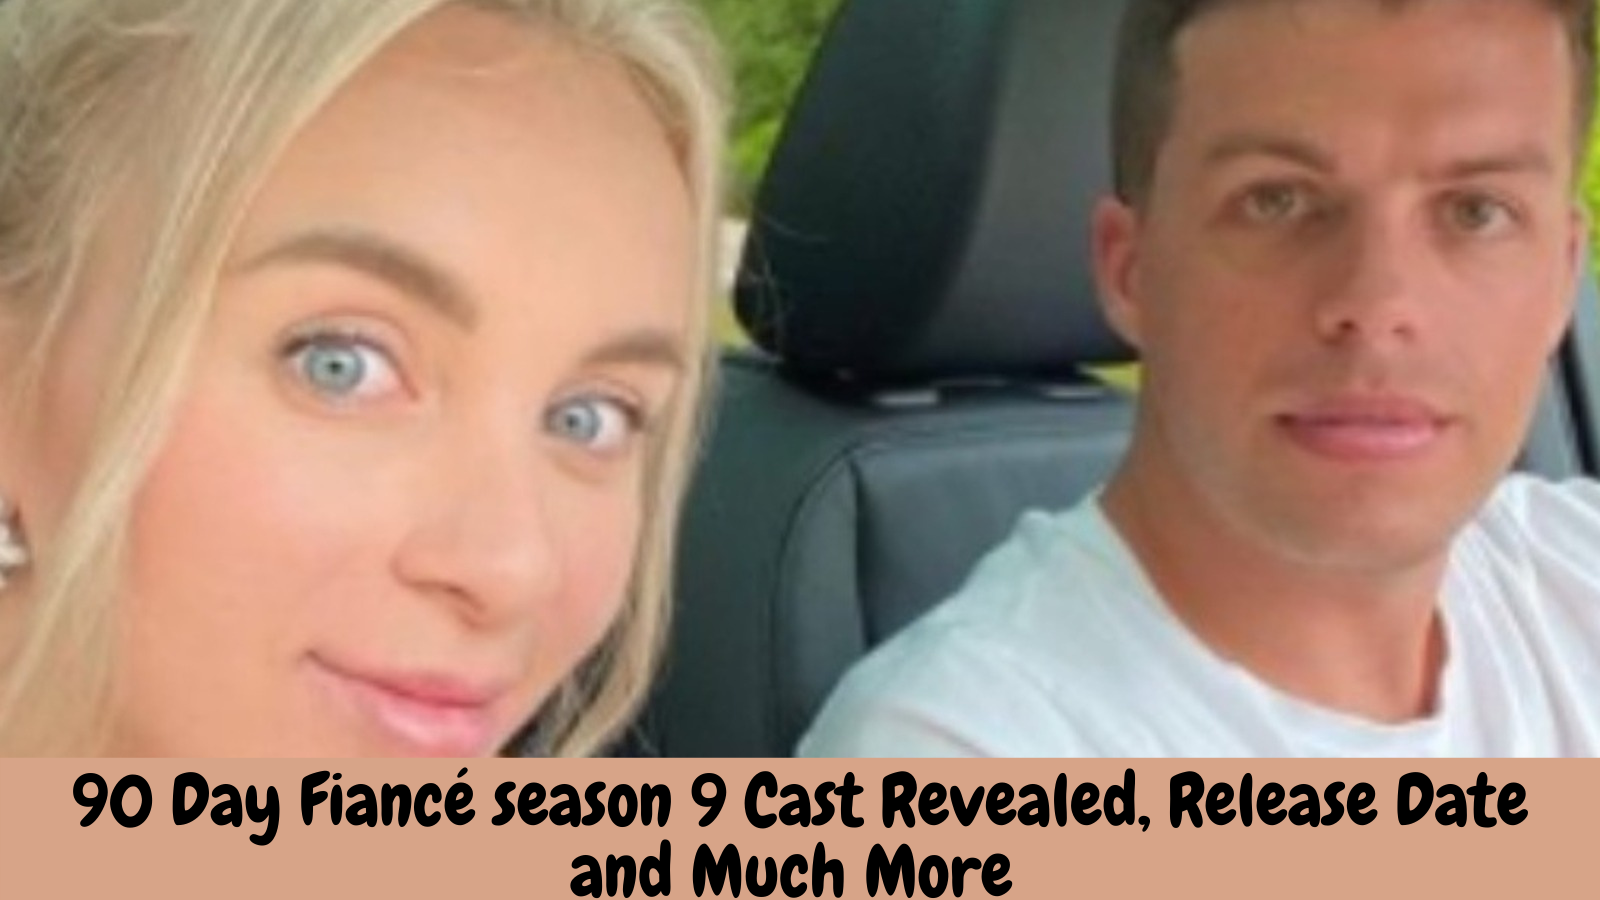 90 Day Fiancé season 9 Cast Revealed, Release Date and Much More